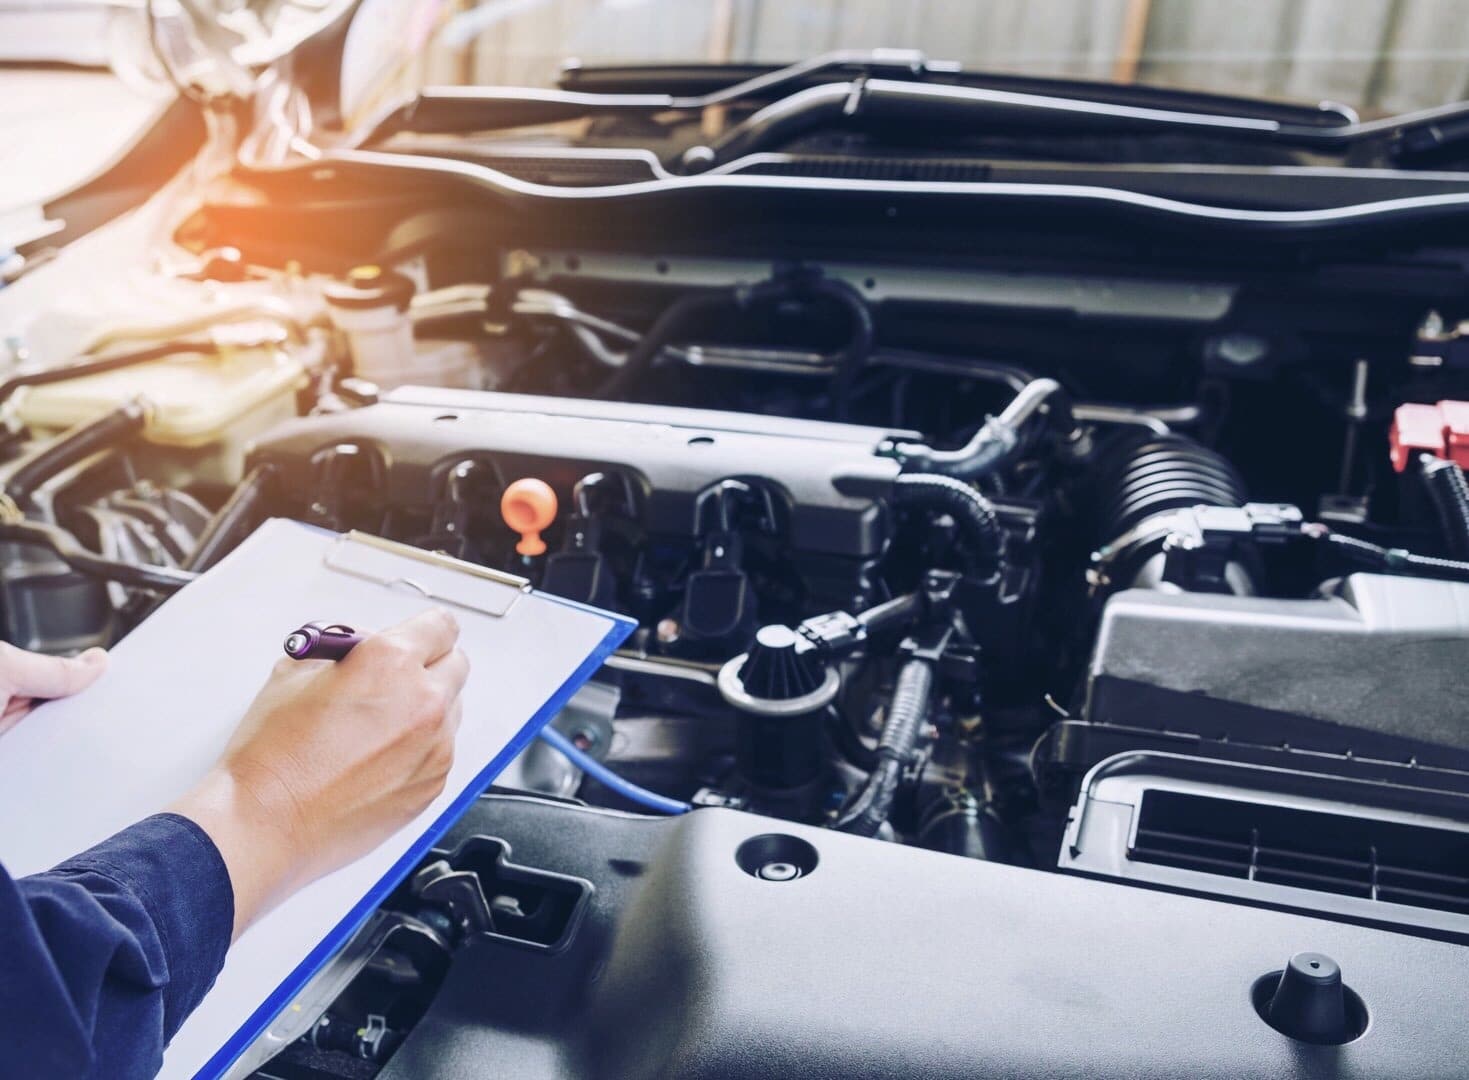 Vehicle inspection, machine inspection, machine testing, Machine safety, contaminated brake fluid, brake fluid testing, failed breaks, MOT, vehicle service, vehicle oil level, oil dipstick, check oil, check car oil, test engine oil